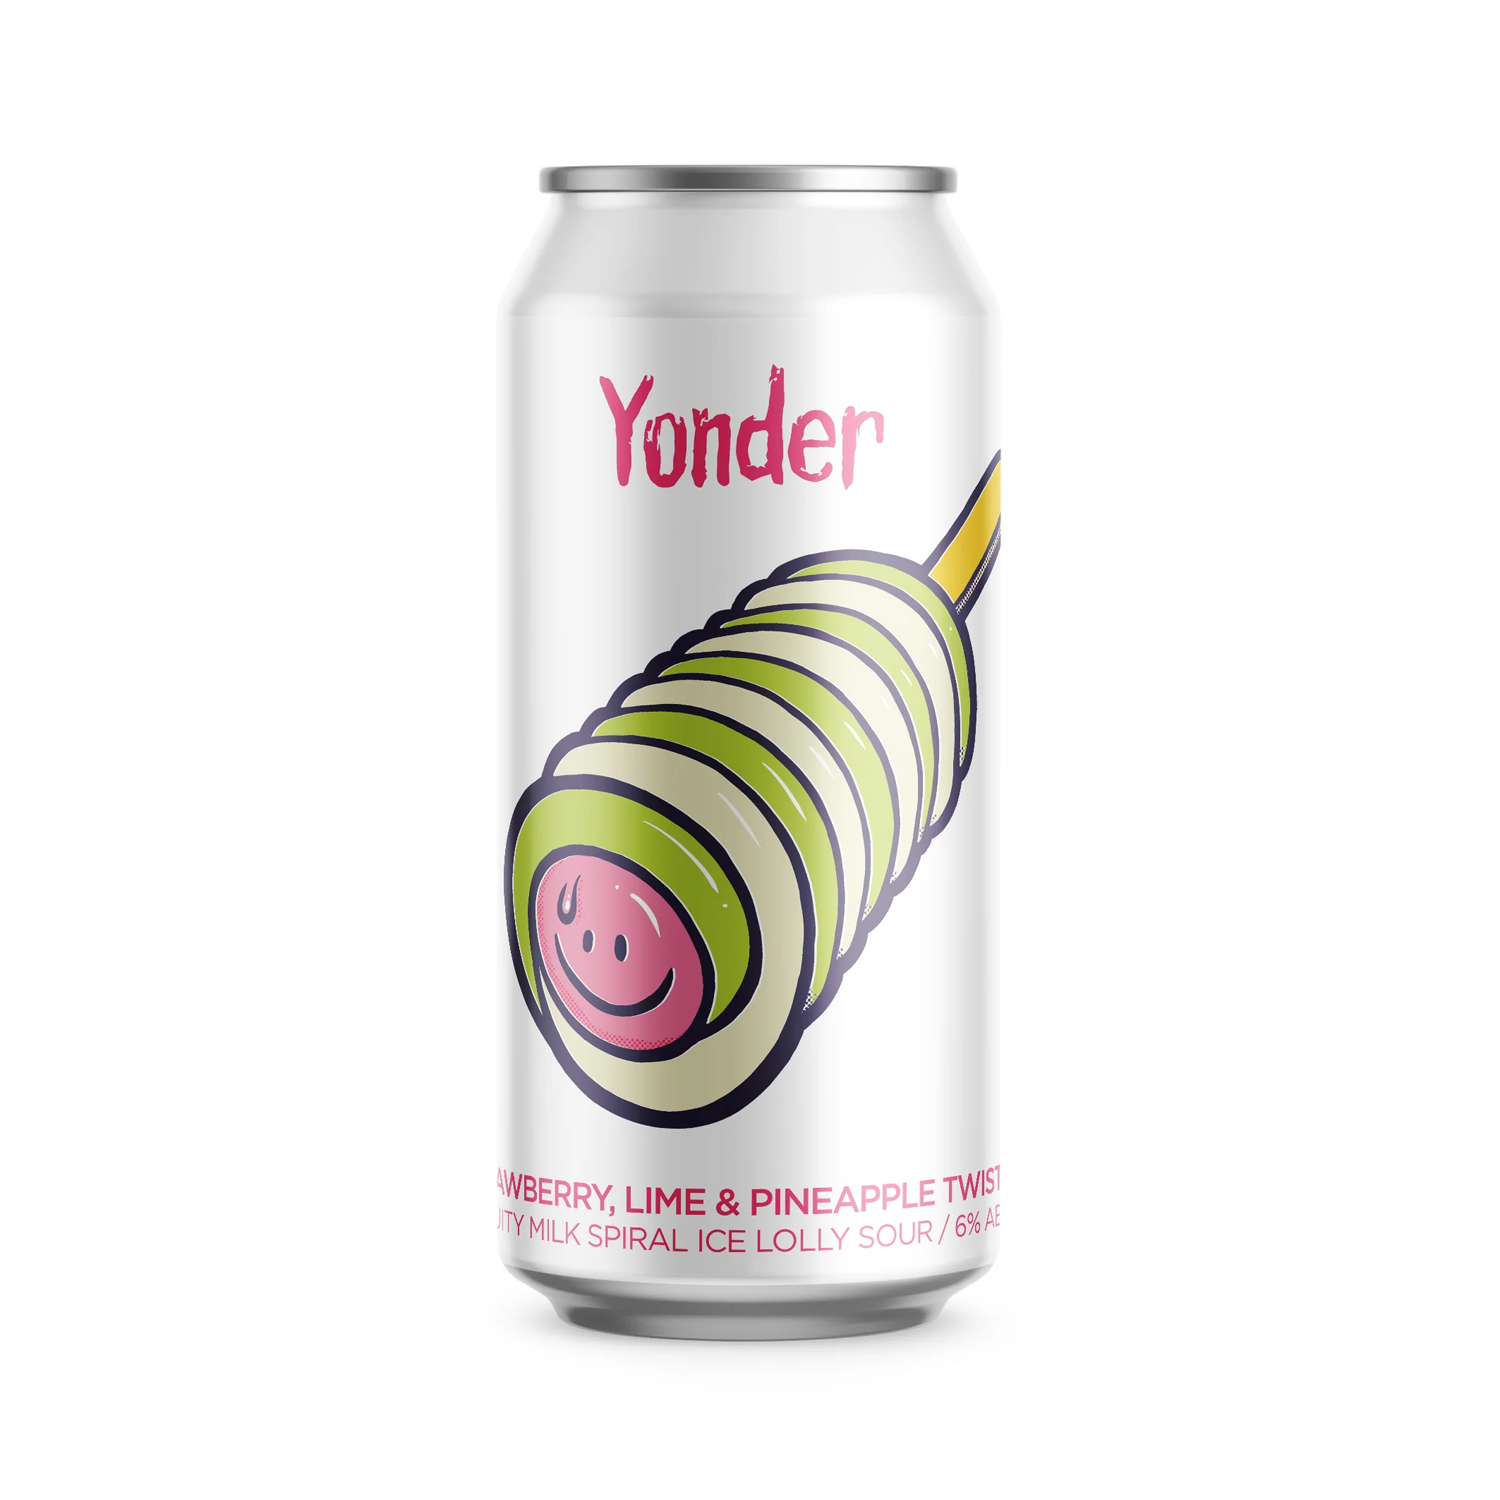 Yonder Twister Strawberry Lime & Pineapple Ice Lolly Sour